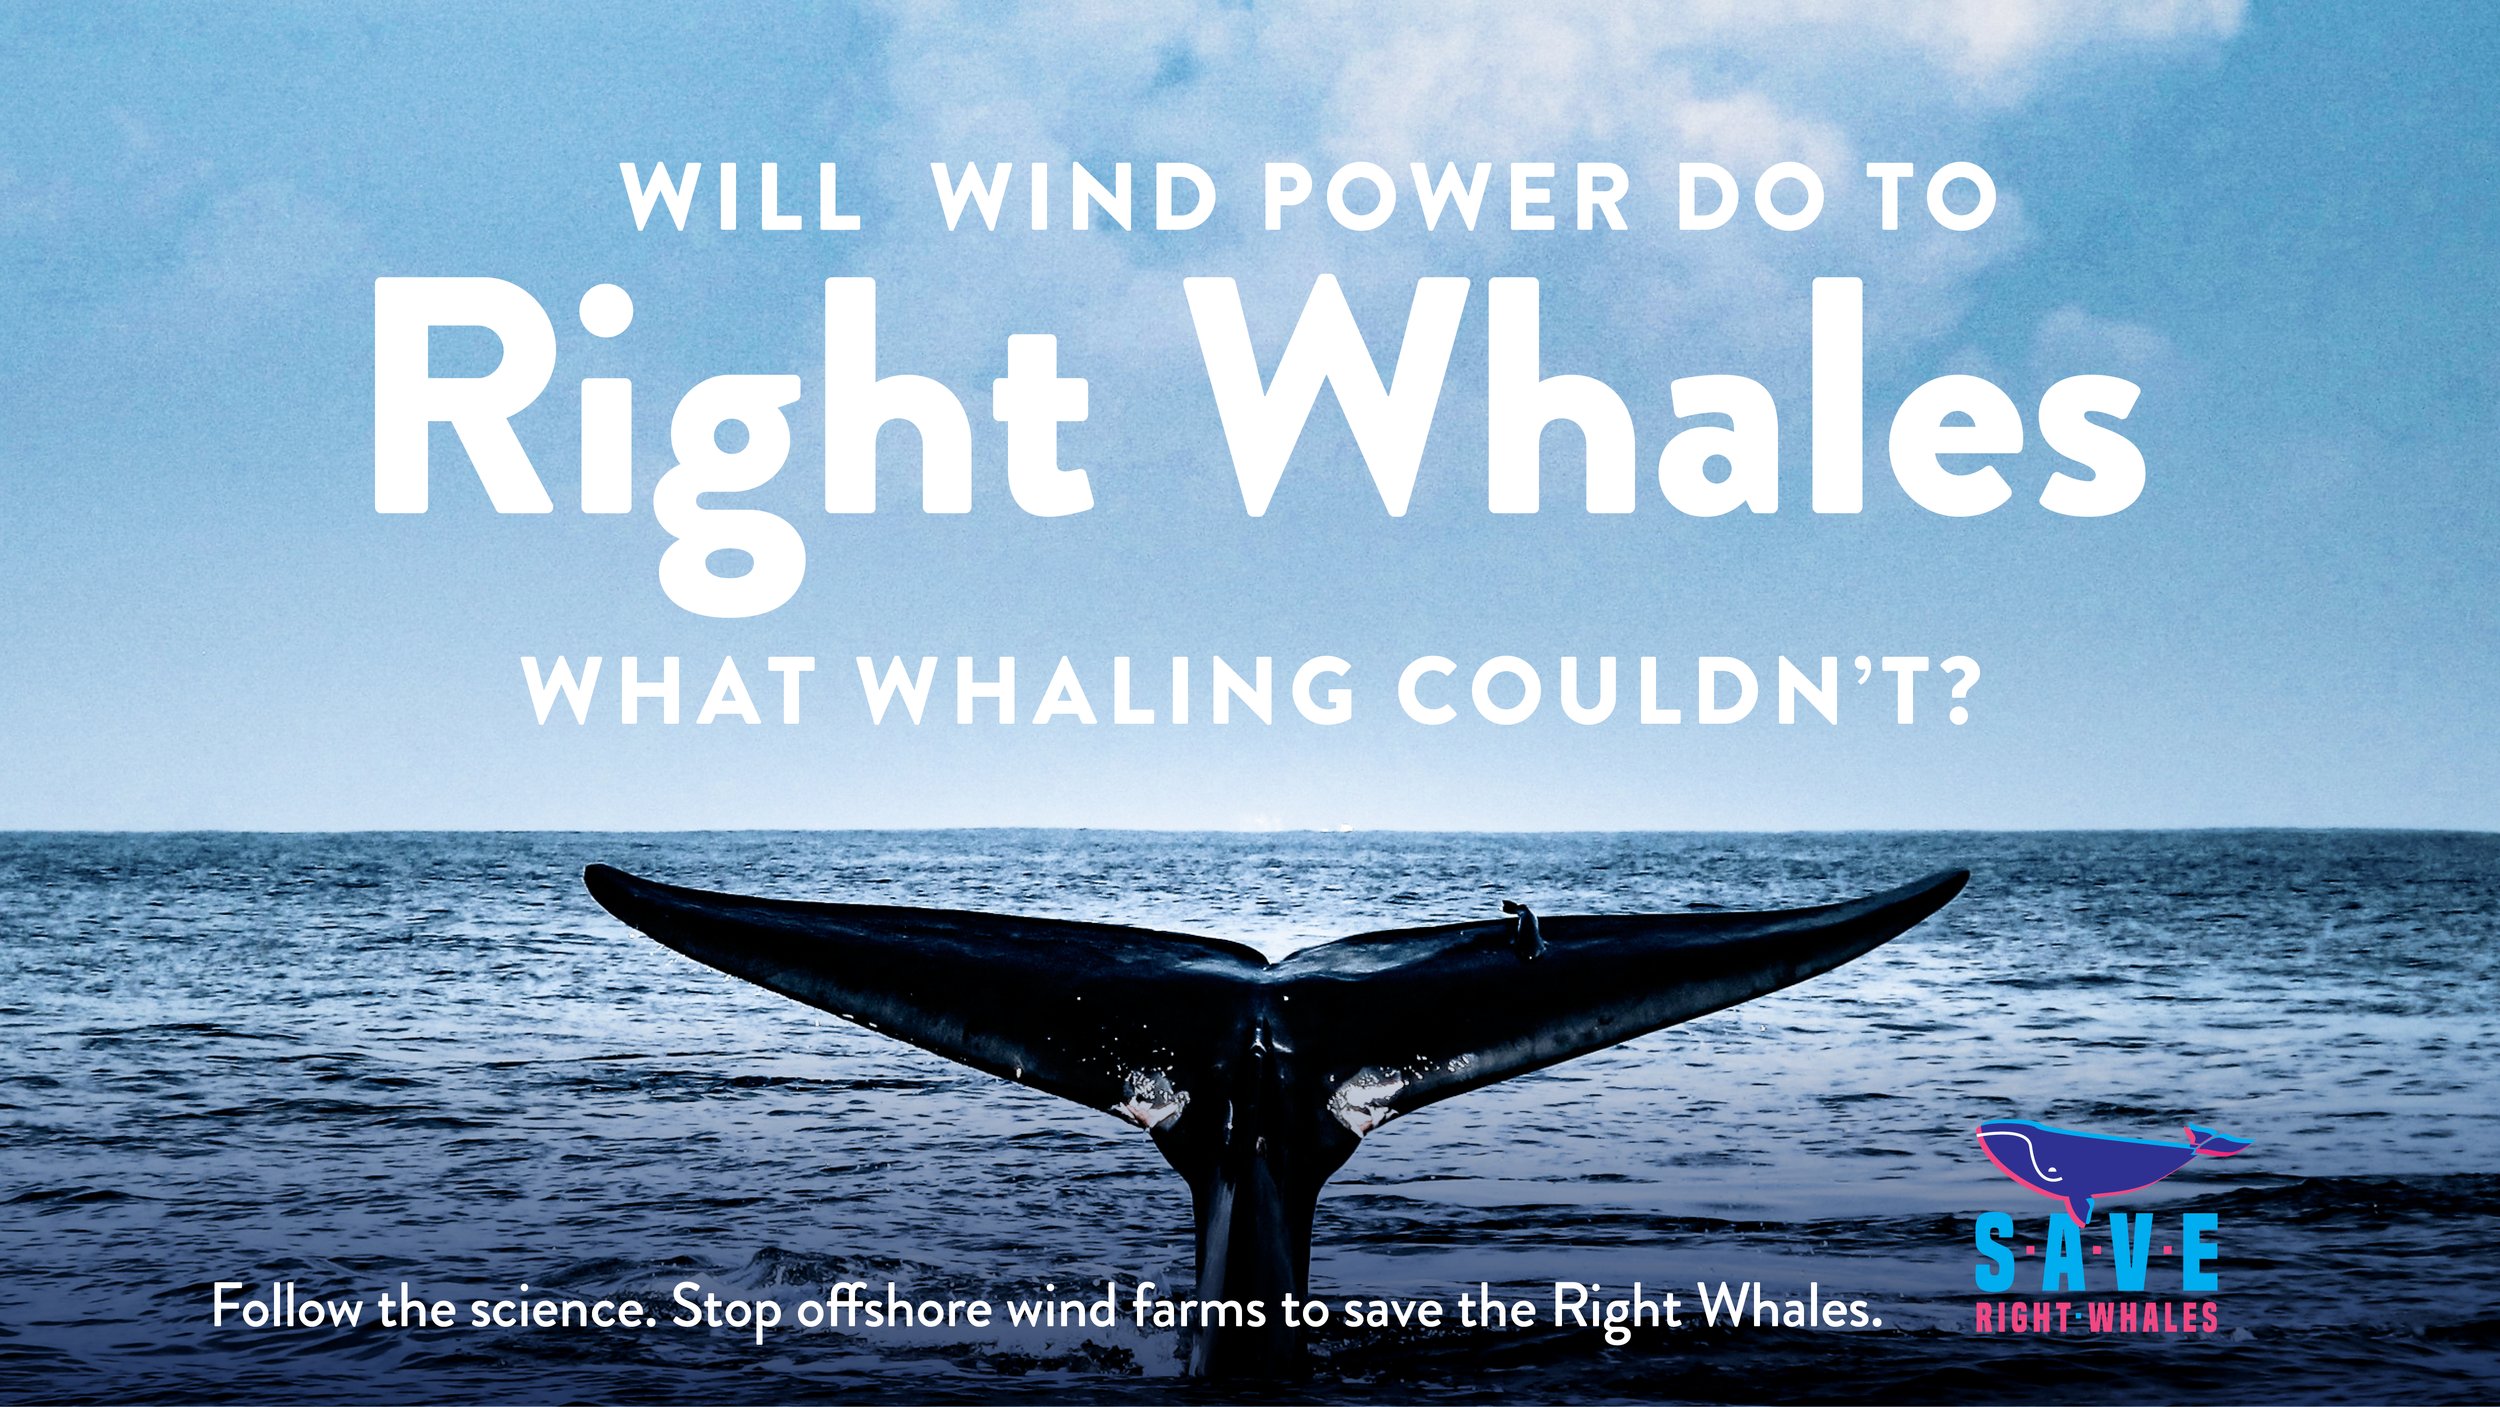 Save Right Whales